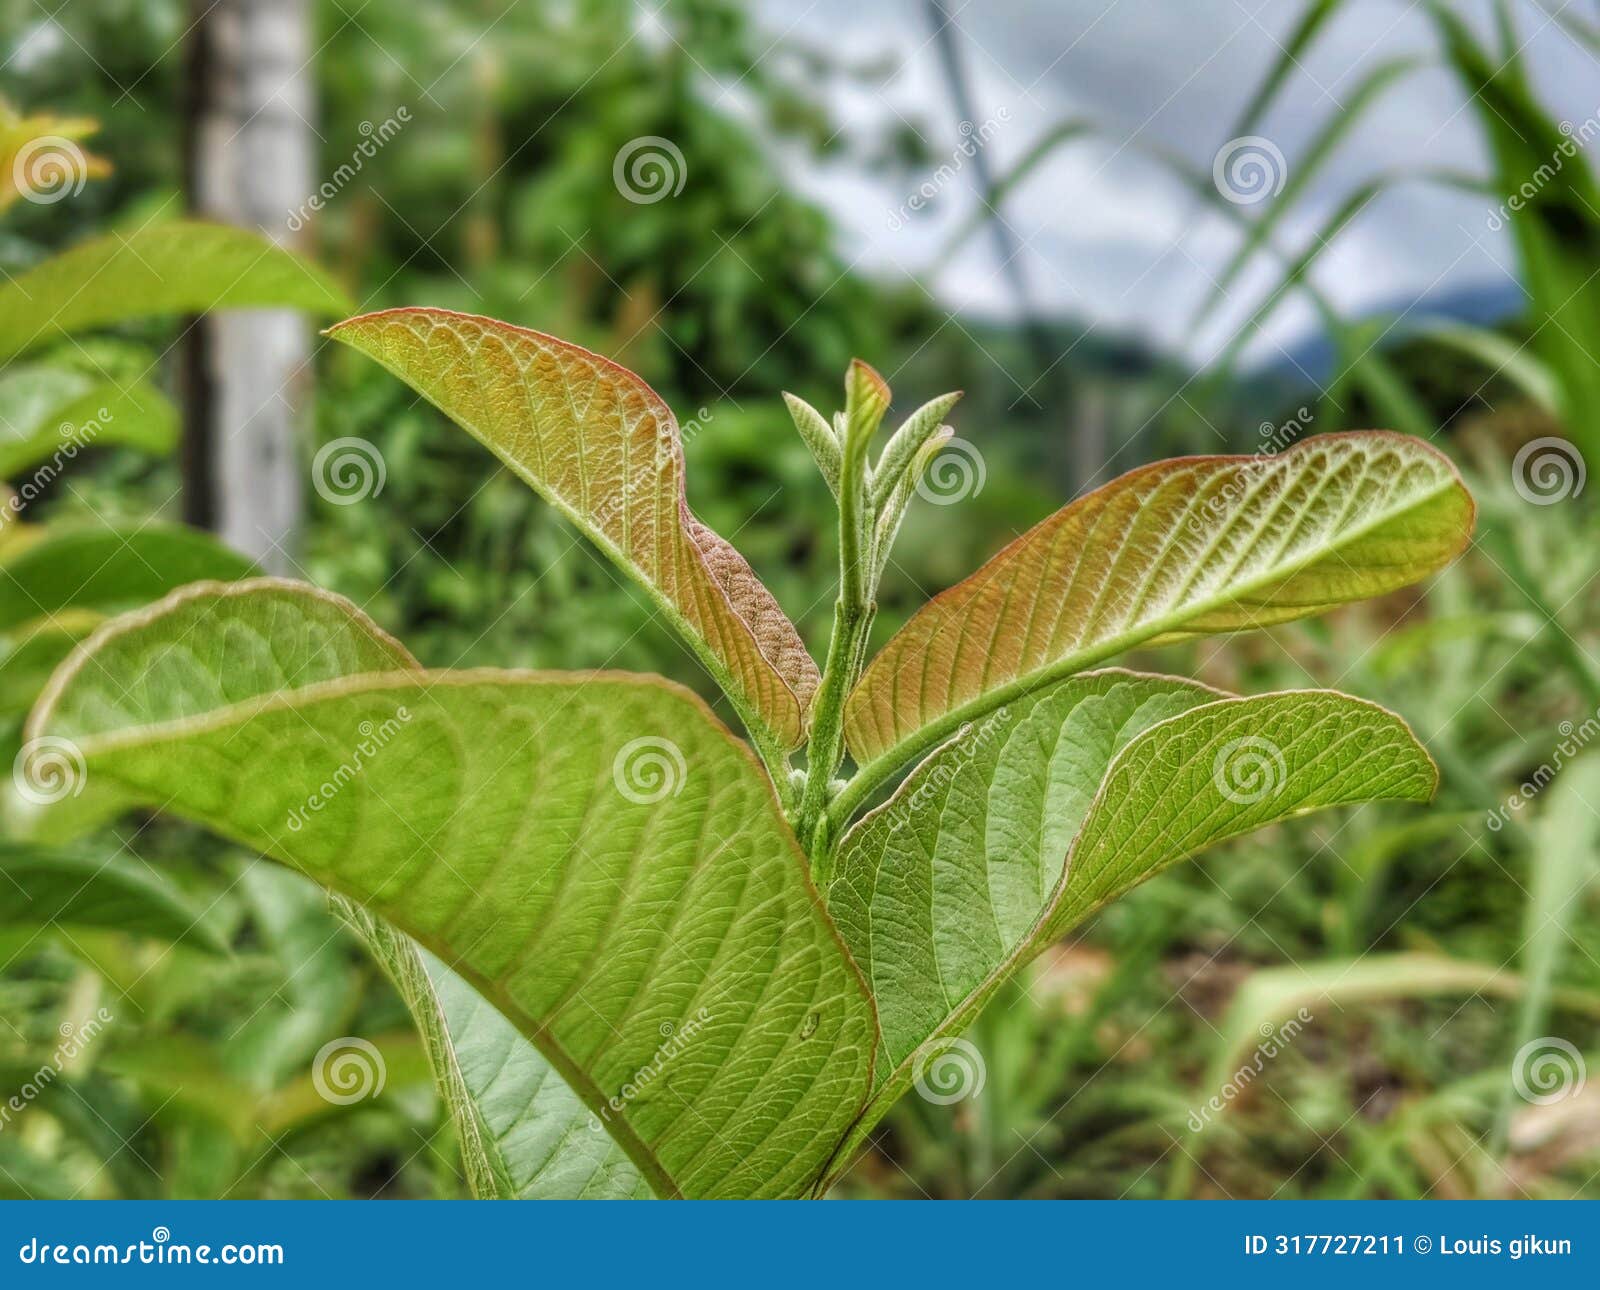 guava leaf shoots are fresh green and lush